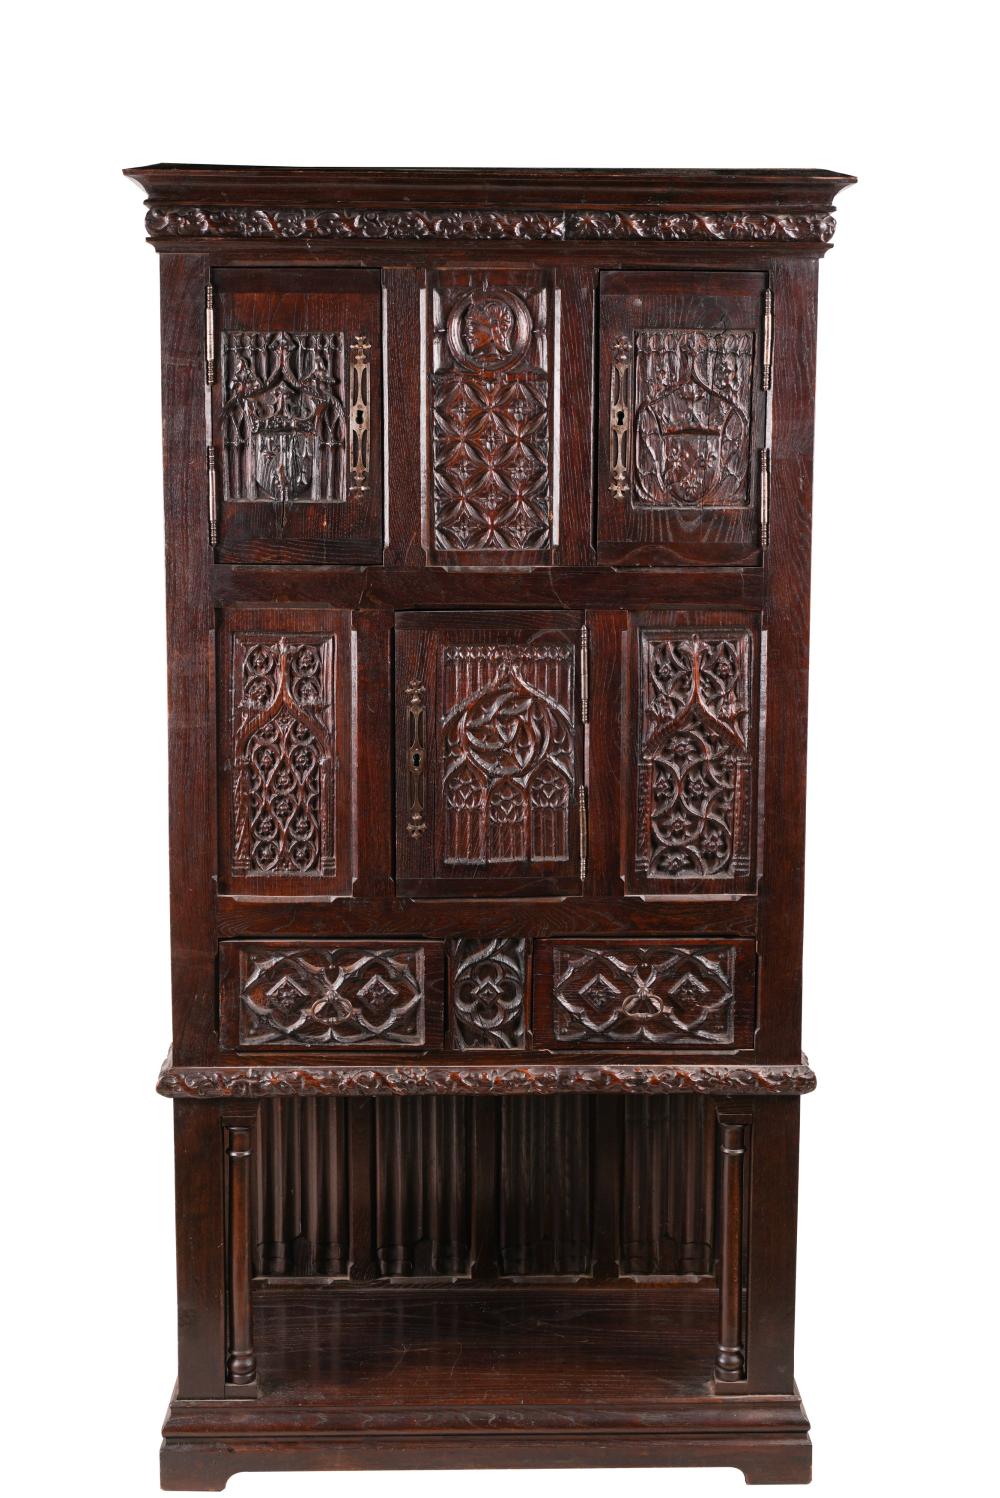 GOTHIC-STYLE CARVED OAK RELIQUARY